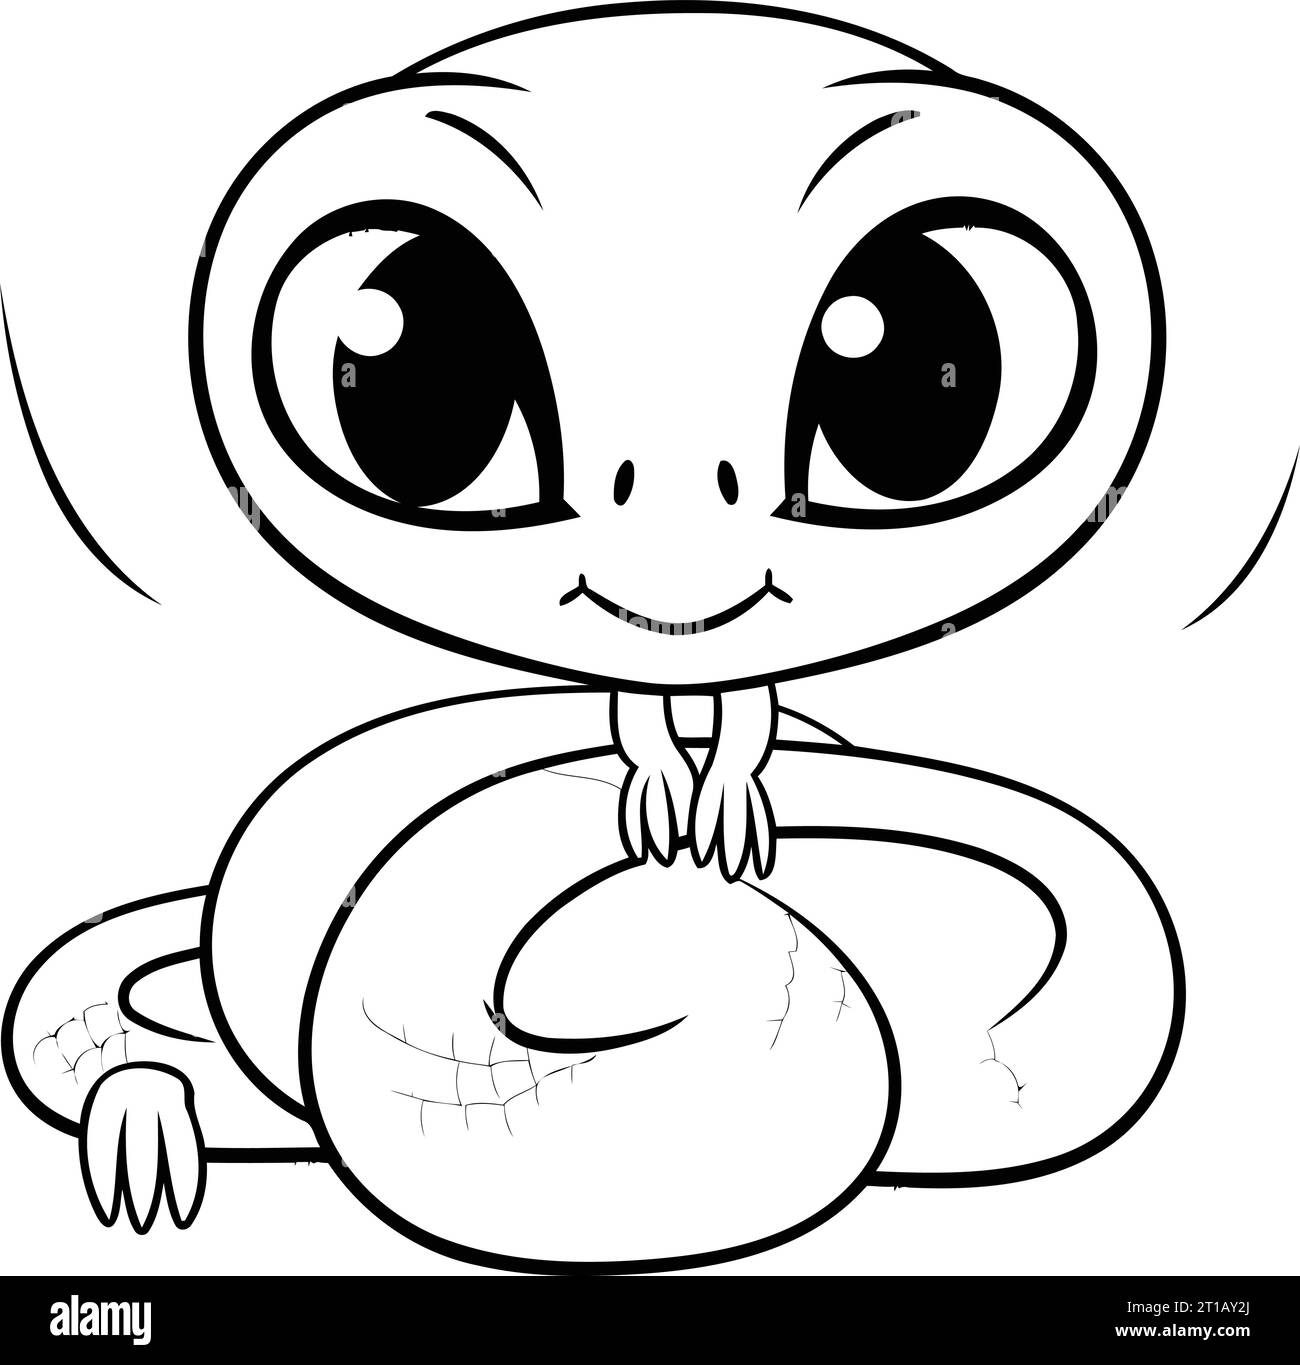 Black and White Cartoon Illustration of Cute Little Snake Character Coloring Book Stock Vector